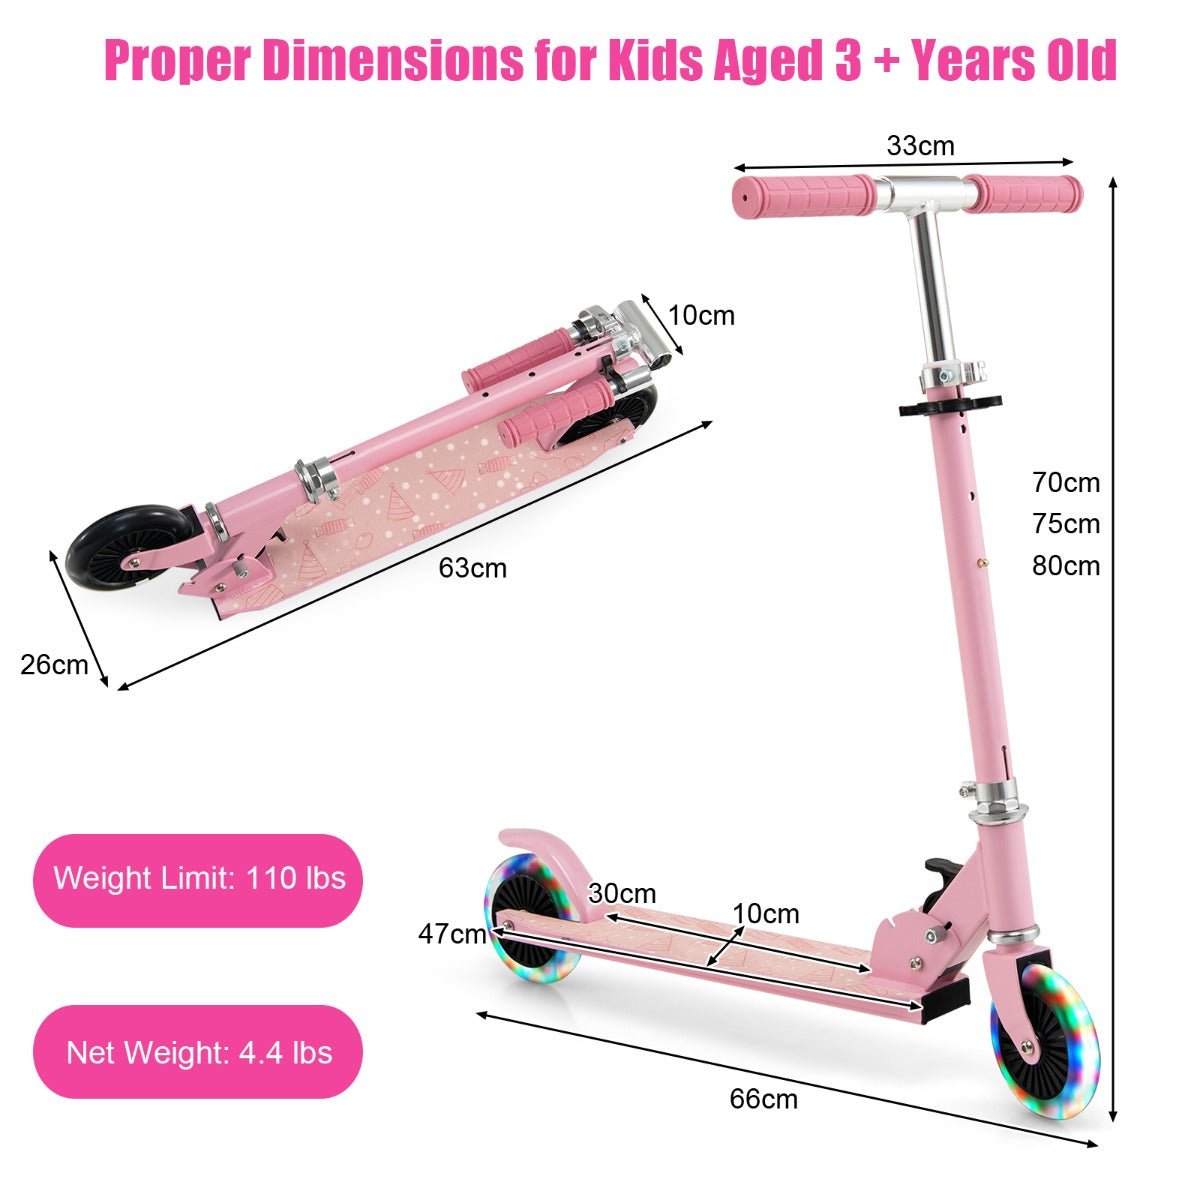 Kids Mega Mart: Your Go-To for Foldable Lightweight Kick Scooters